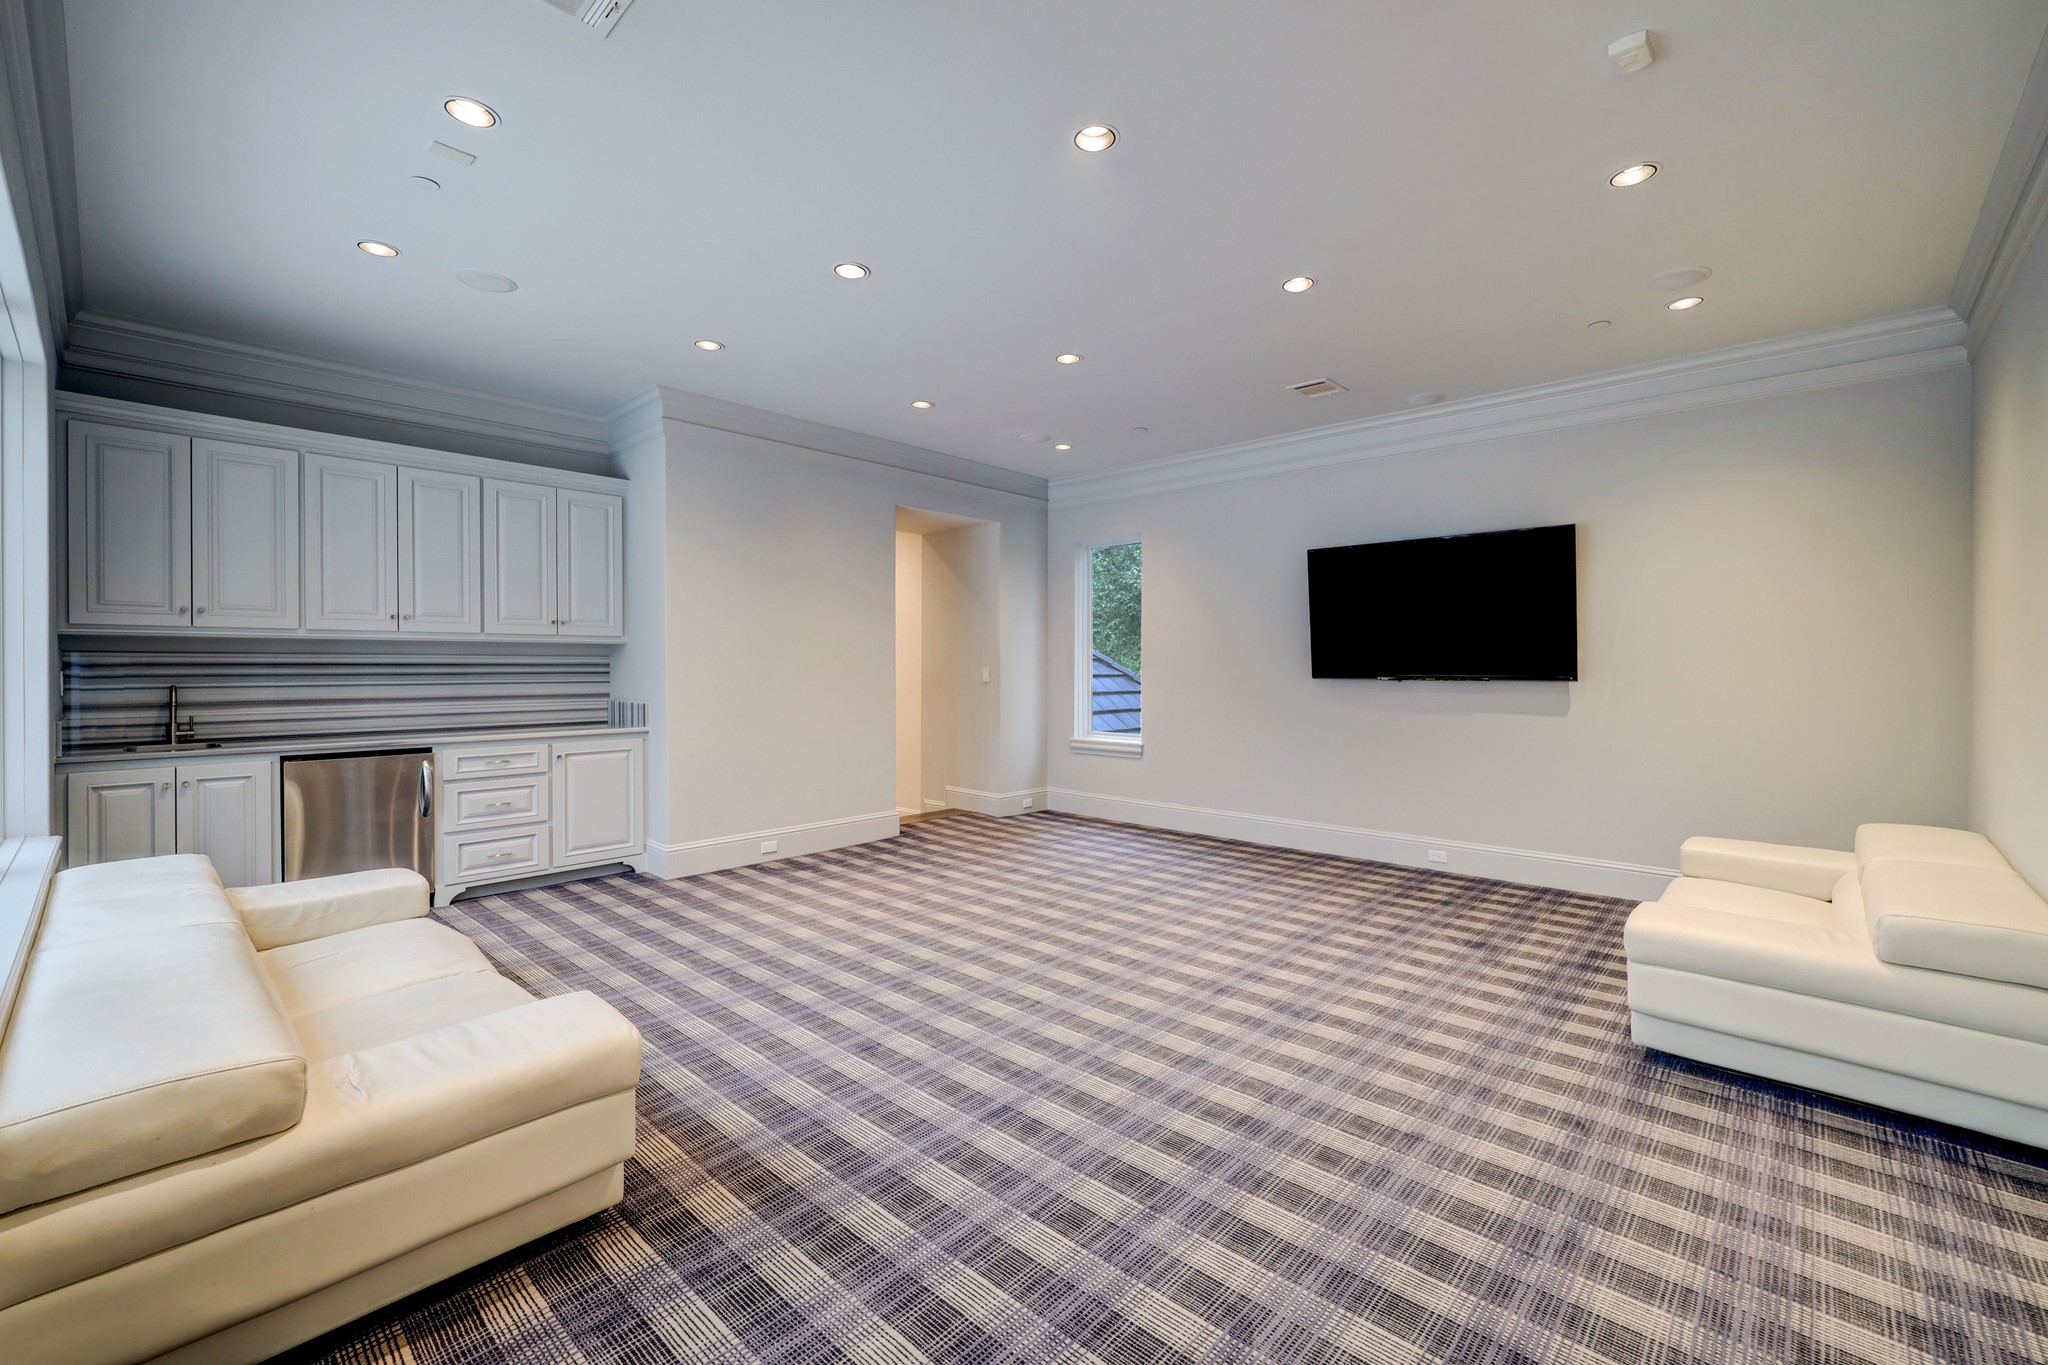 The Game Room is located upstairs and features carpet and a built-in snack bar with sink and cabinet storage.